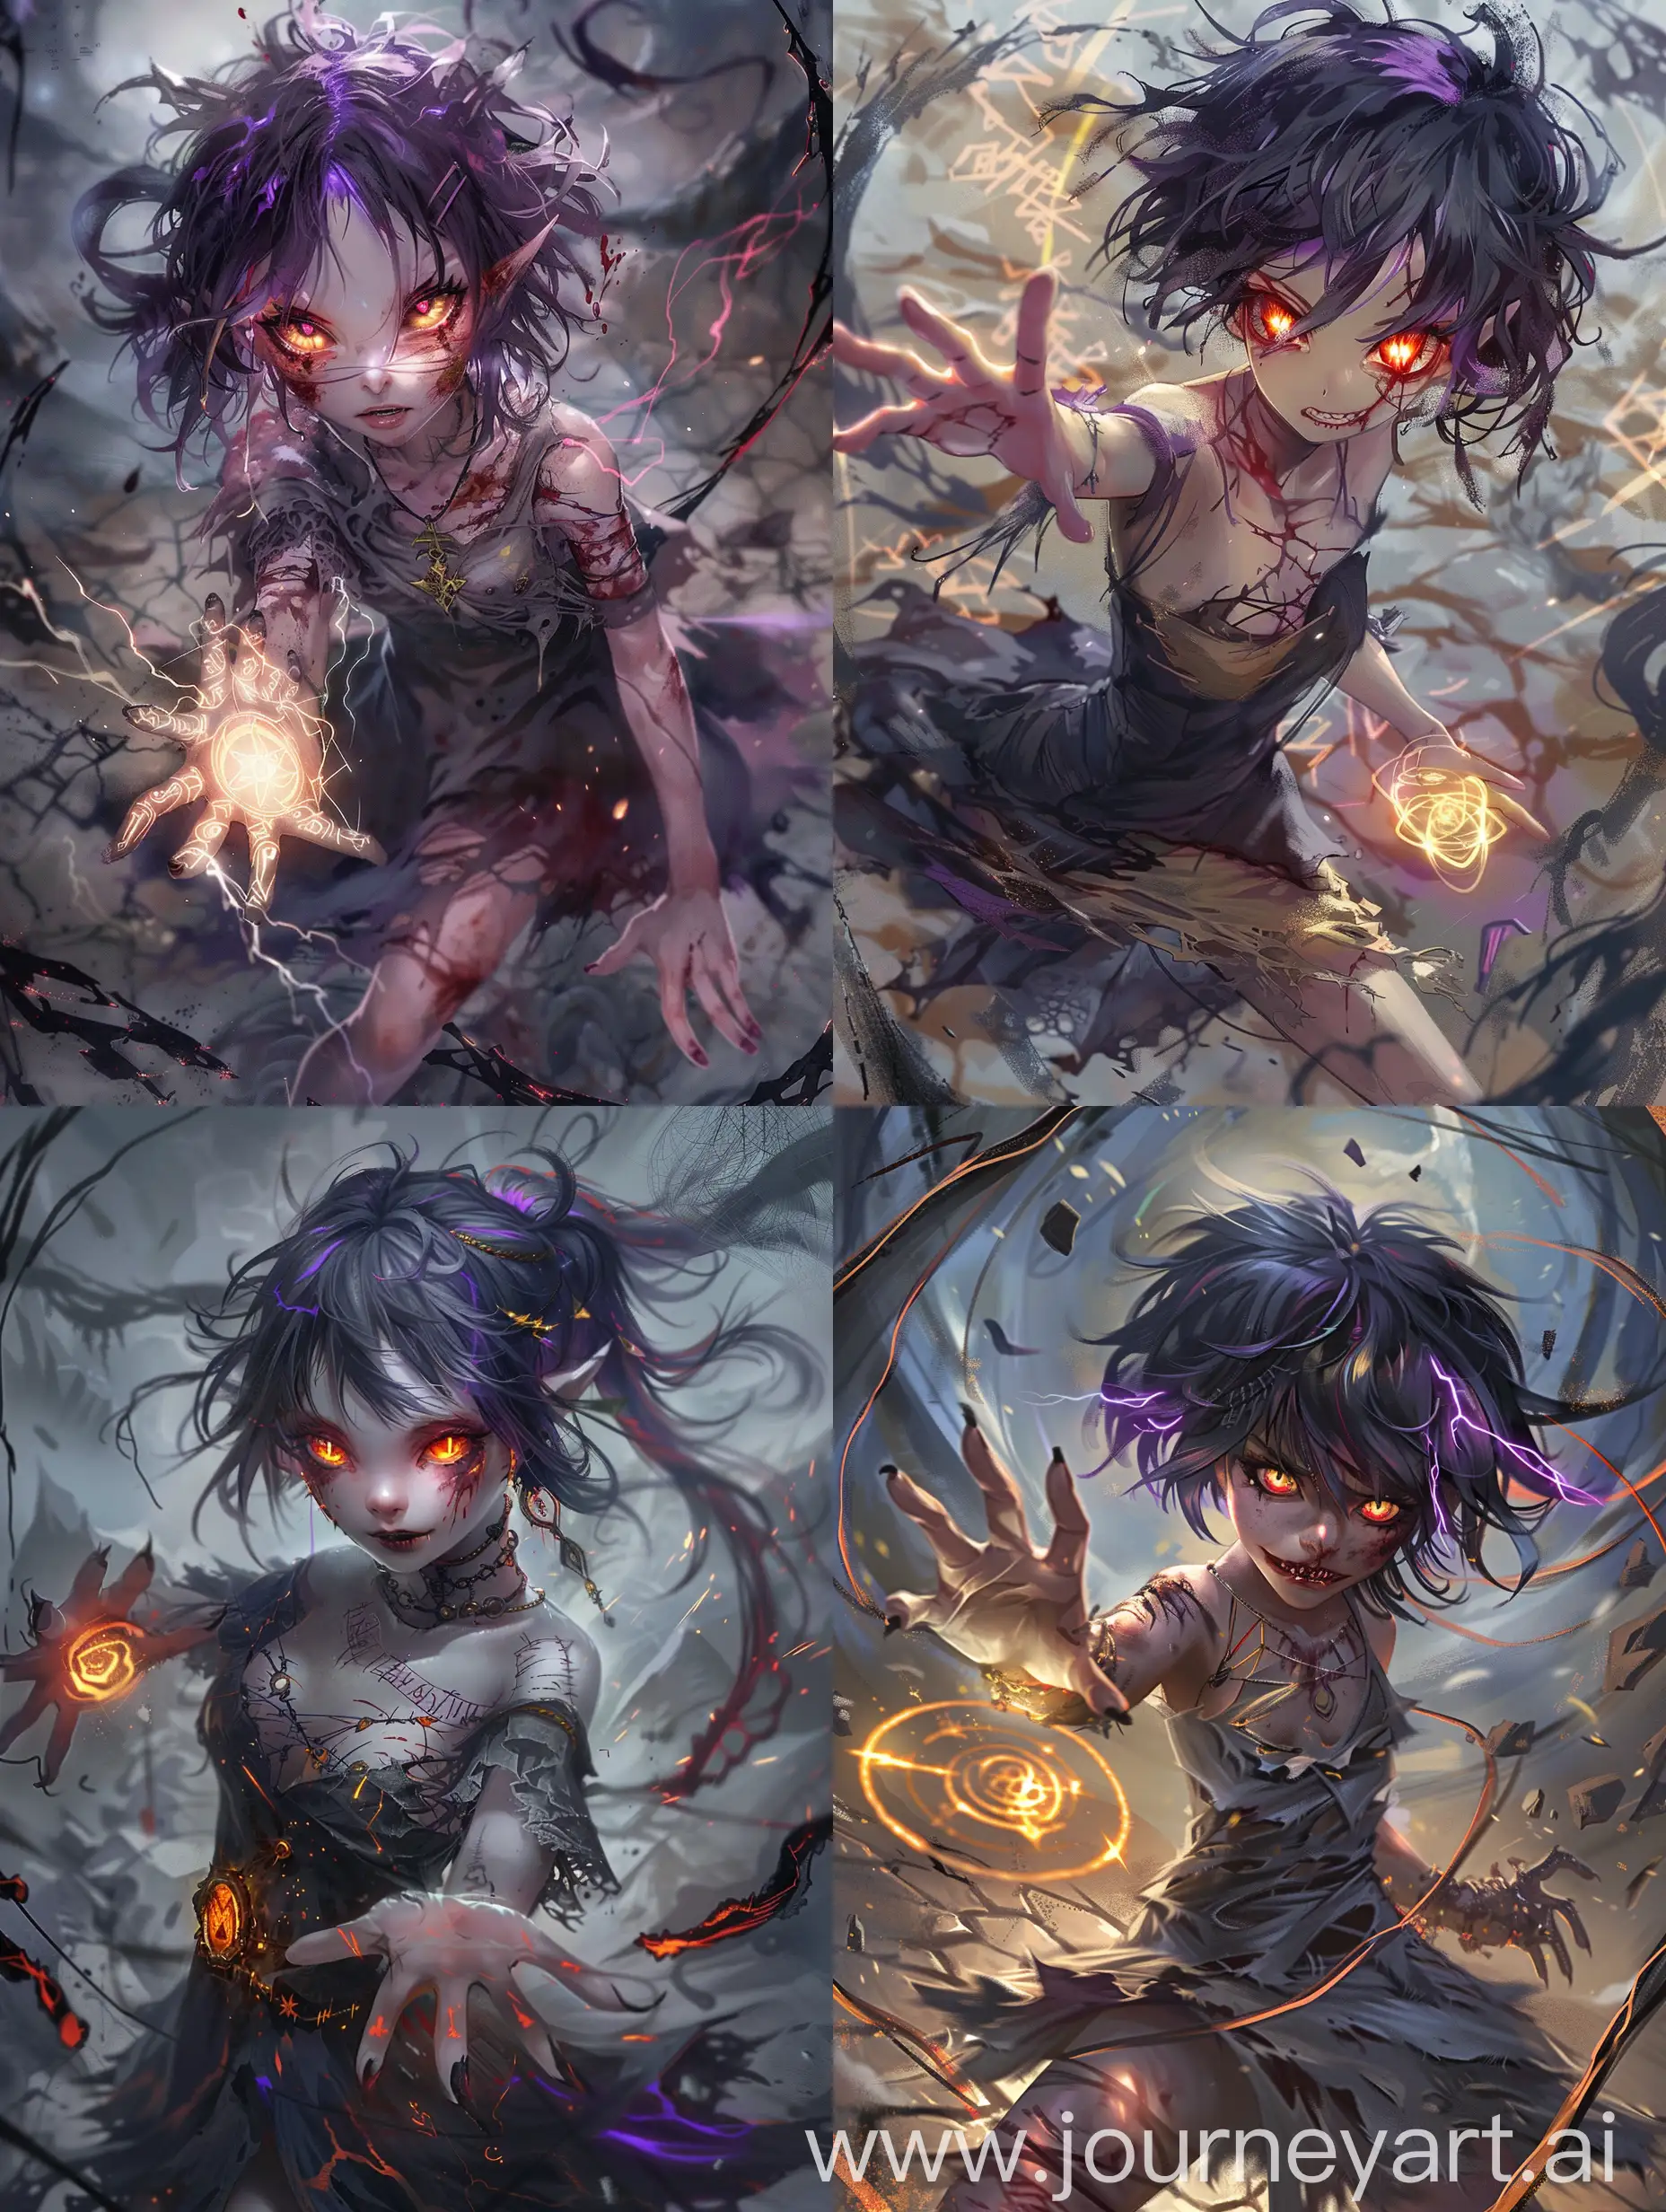 Anime-style young demon girl, ashen or pale lavender skin, vibrant blood-red or glowing yellow eyes with slitted pupils. Jet black hair with crimson or purple streaks, wild and untamed. Gothic tattered dress with glowing runes, confident and menacing posture. One hand outstretched manipulating reality, the other clutching a talisman. Background of dark energy swirls and ghostly apparitions, ground cracked and scorched. Full body, focus on intense eyes and expression of power.